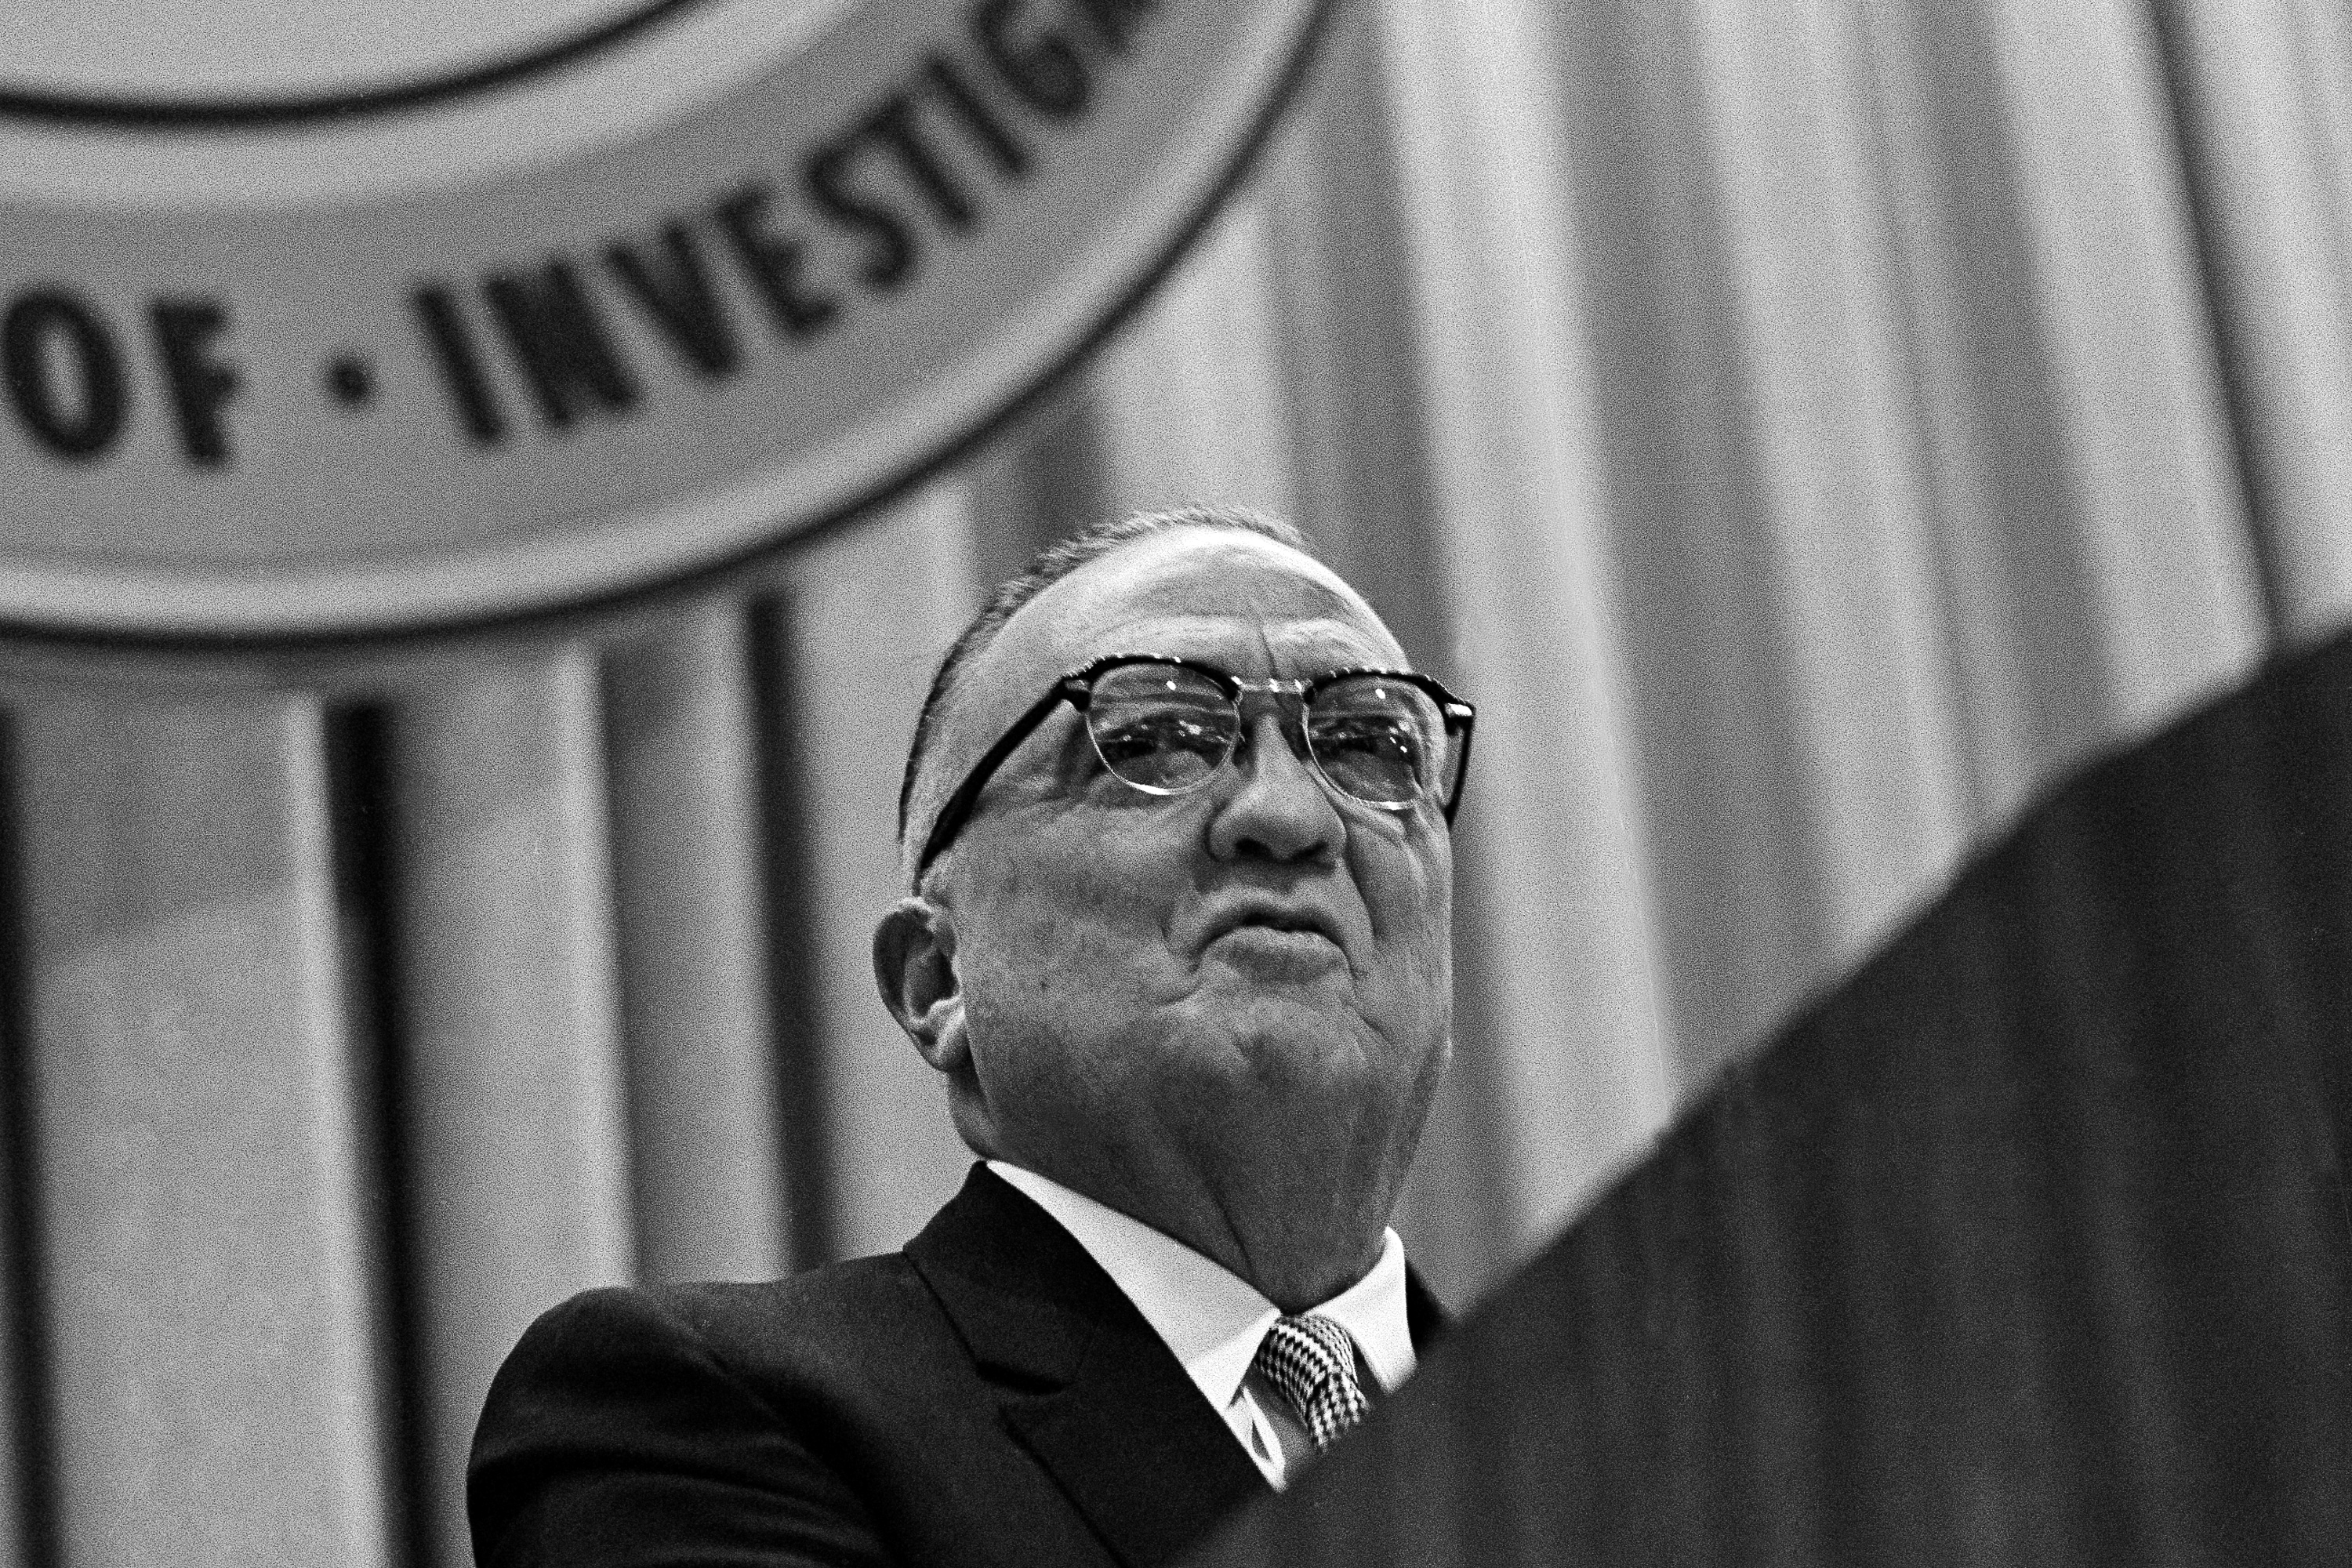 Unpacking the impact of J. Edgar Hoover on the FBI and 20th century America